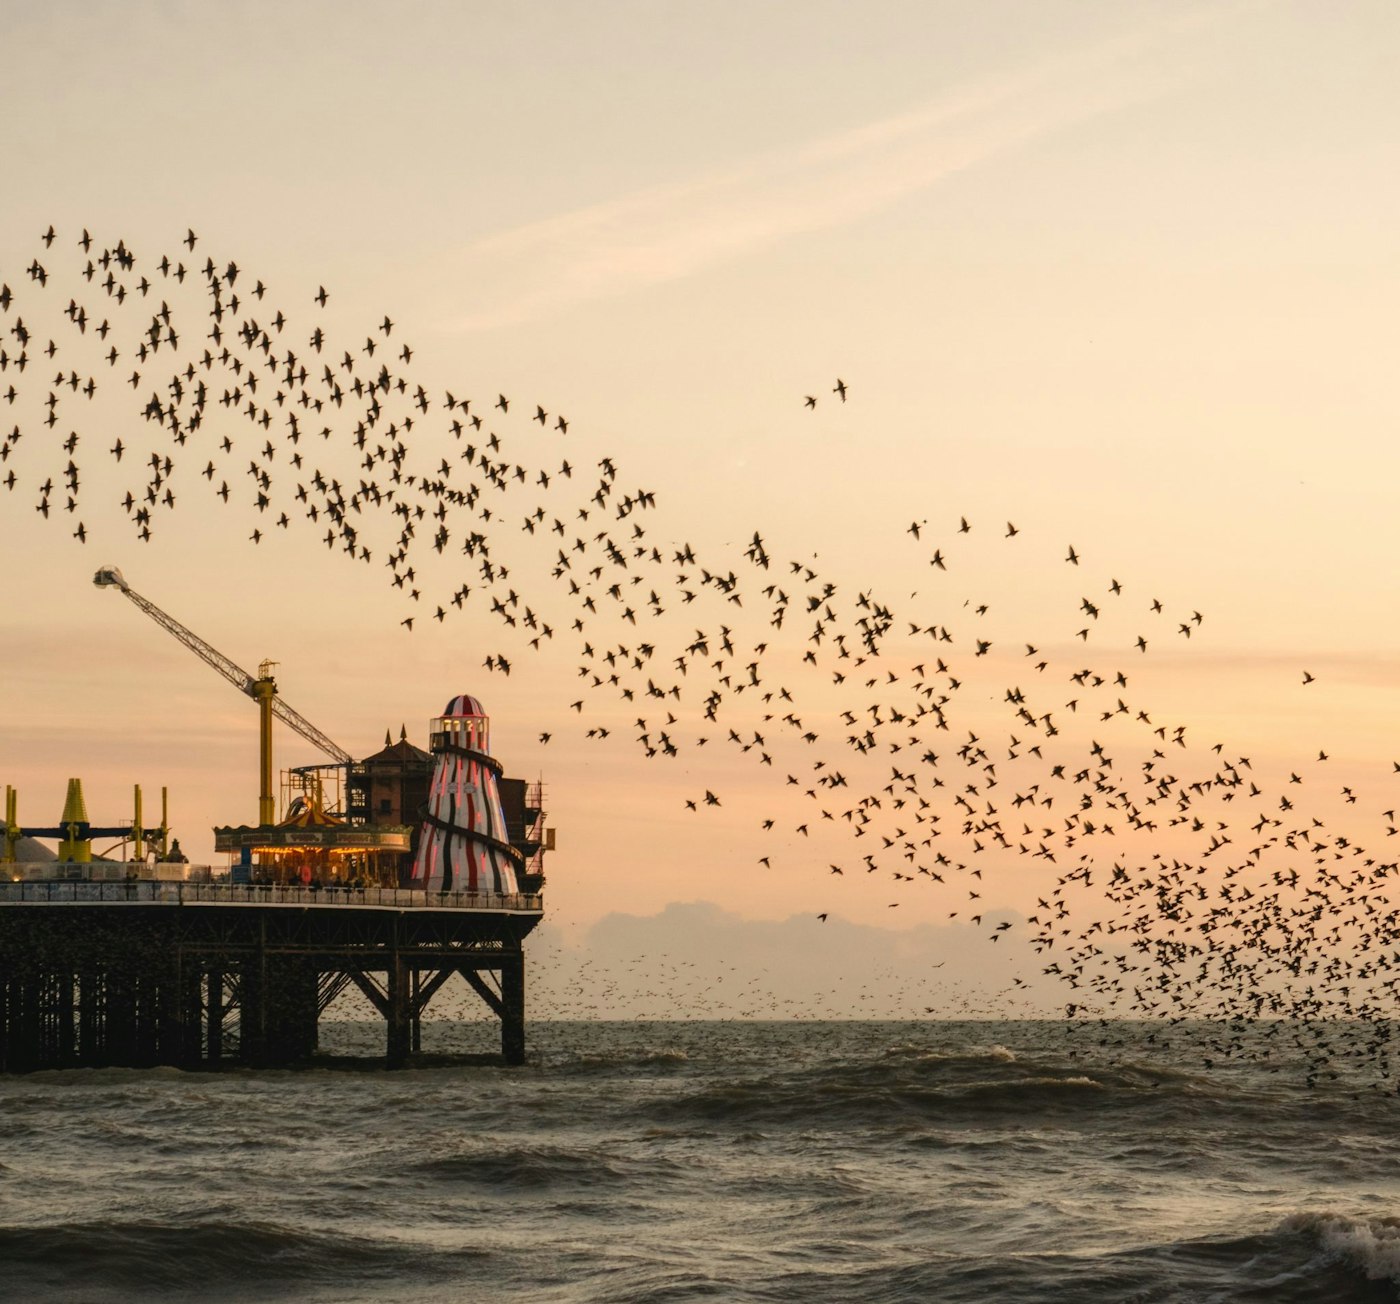 flock-of-birds-flying-at-sunset-with-pier-in-background